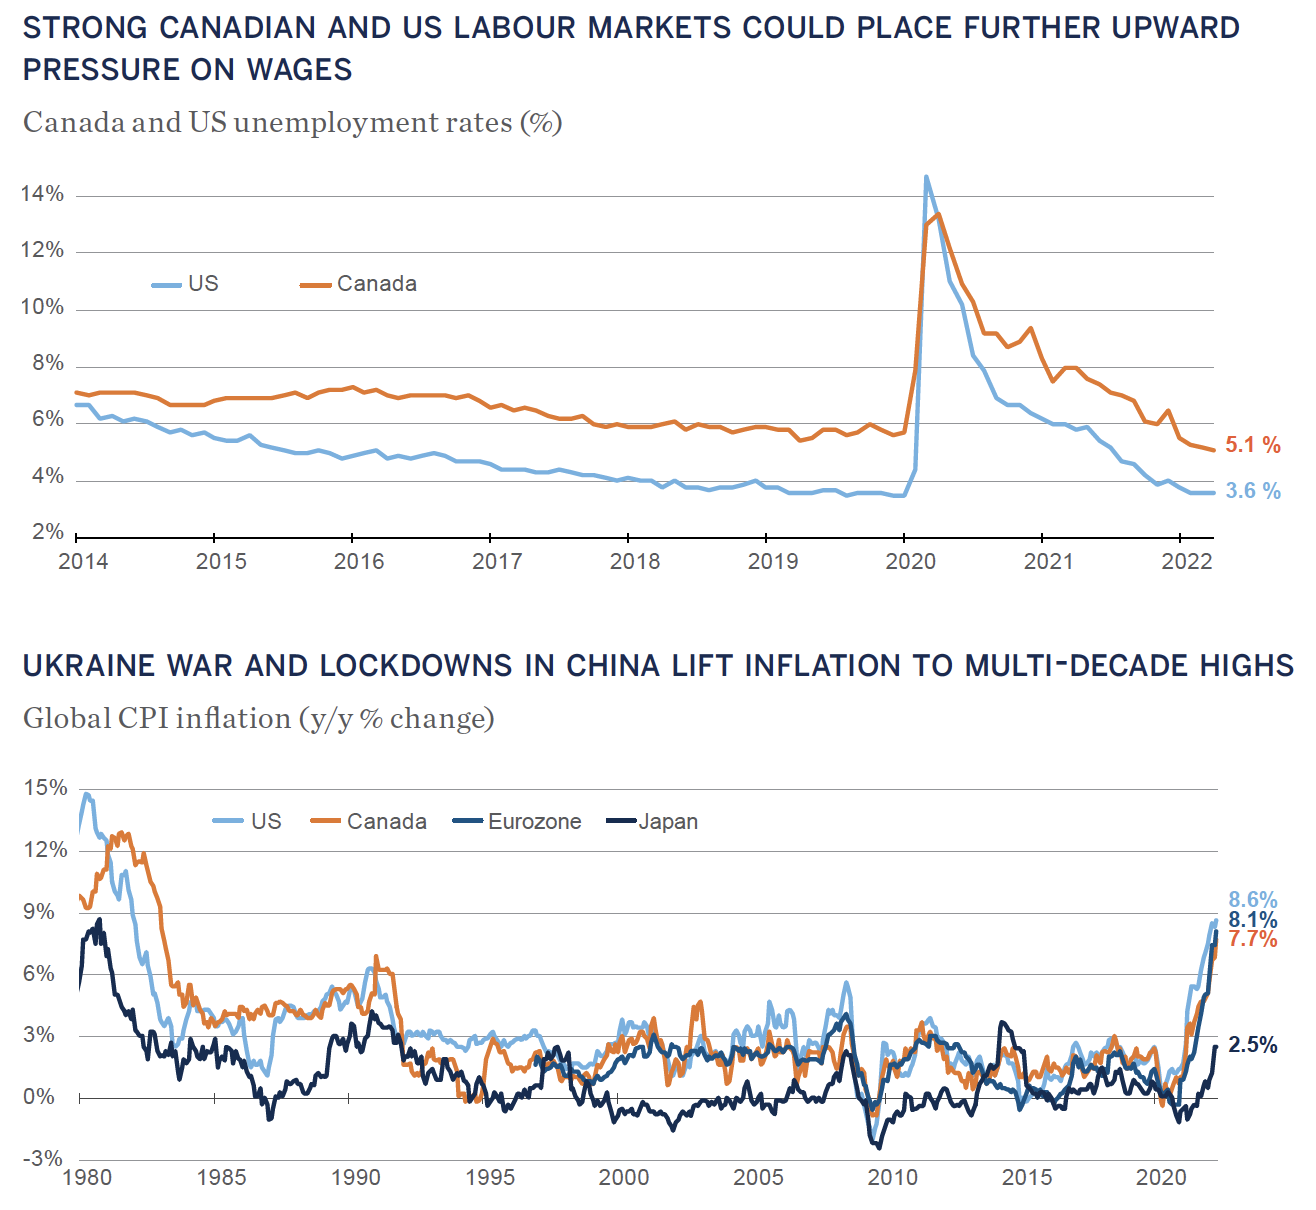 Strong Canadian and US labour markets and Ukraine war and lockdowns in china charts